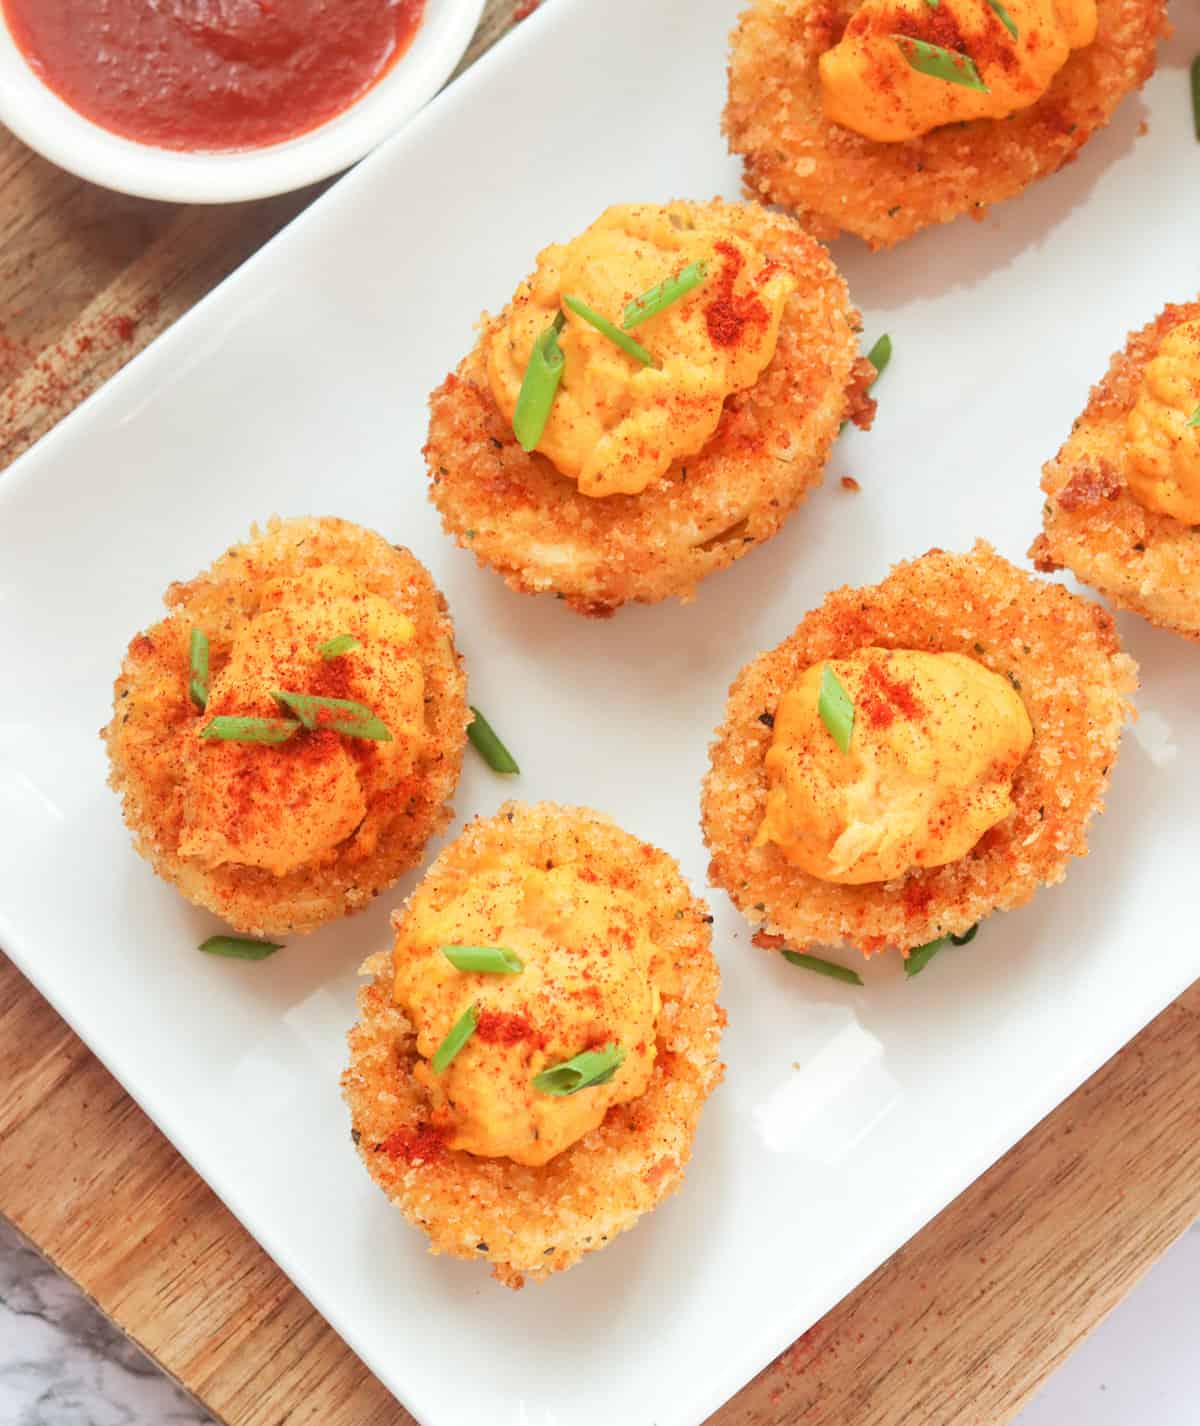 Southern fried deviled eggs for your next party appetizer